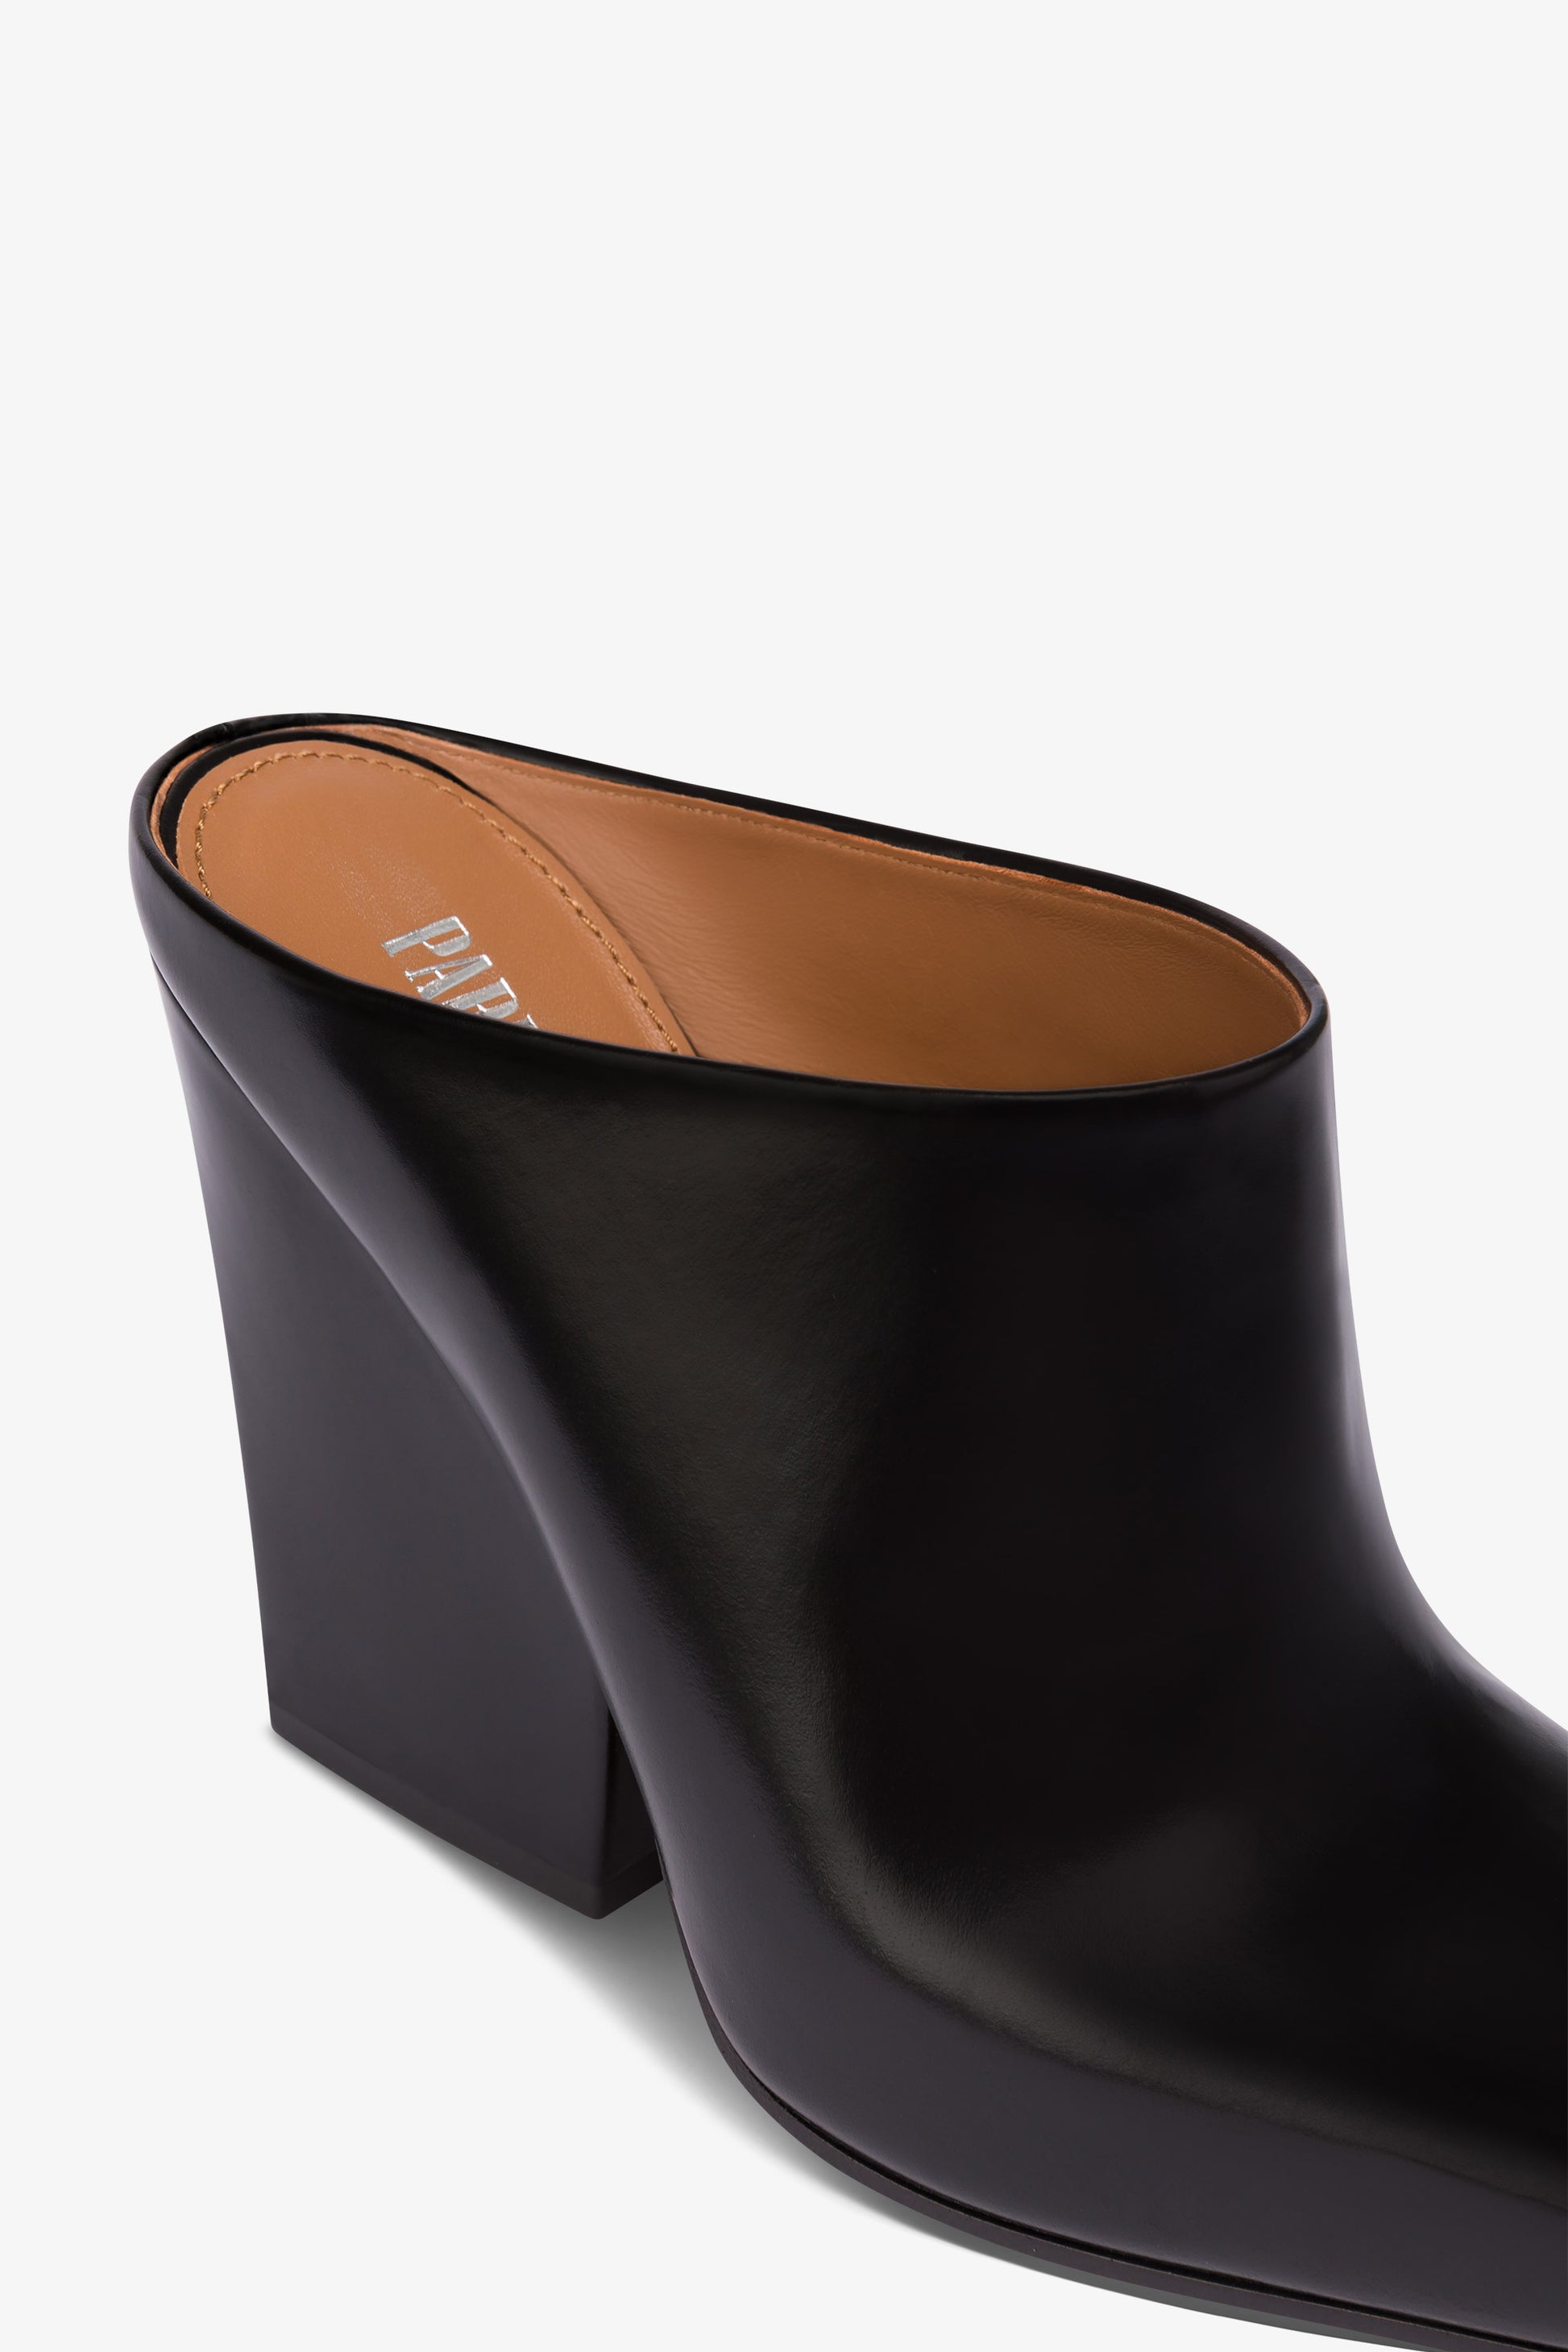 Long, pointed mule boots in soft black brushed leather